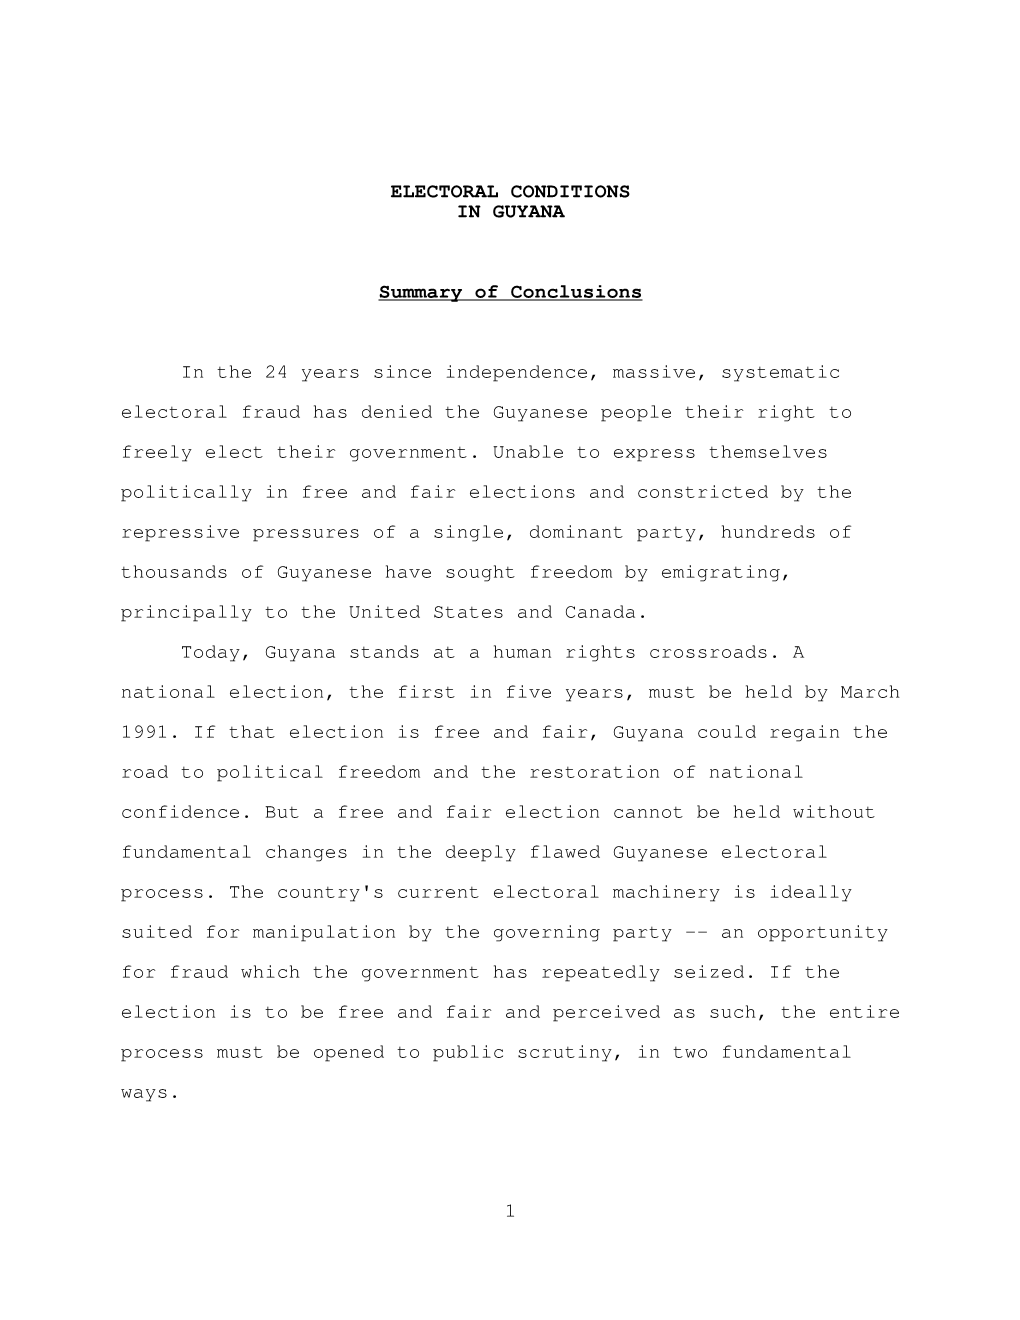 1 ELECTORAL CONDITIONS in GUYANA Summary of Conclusions